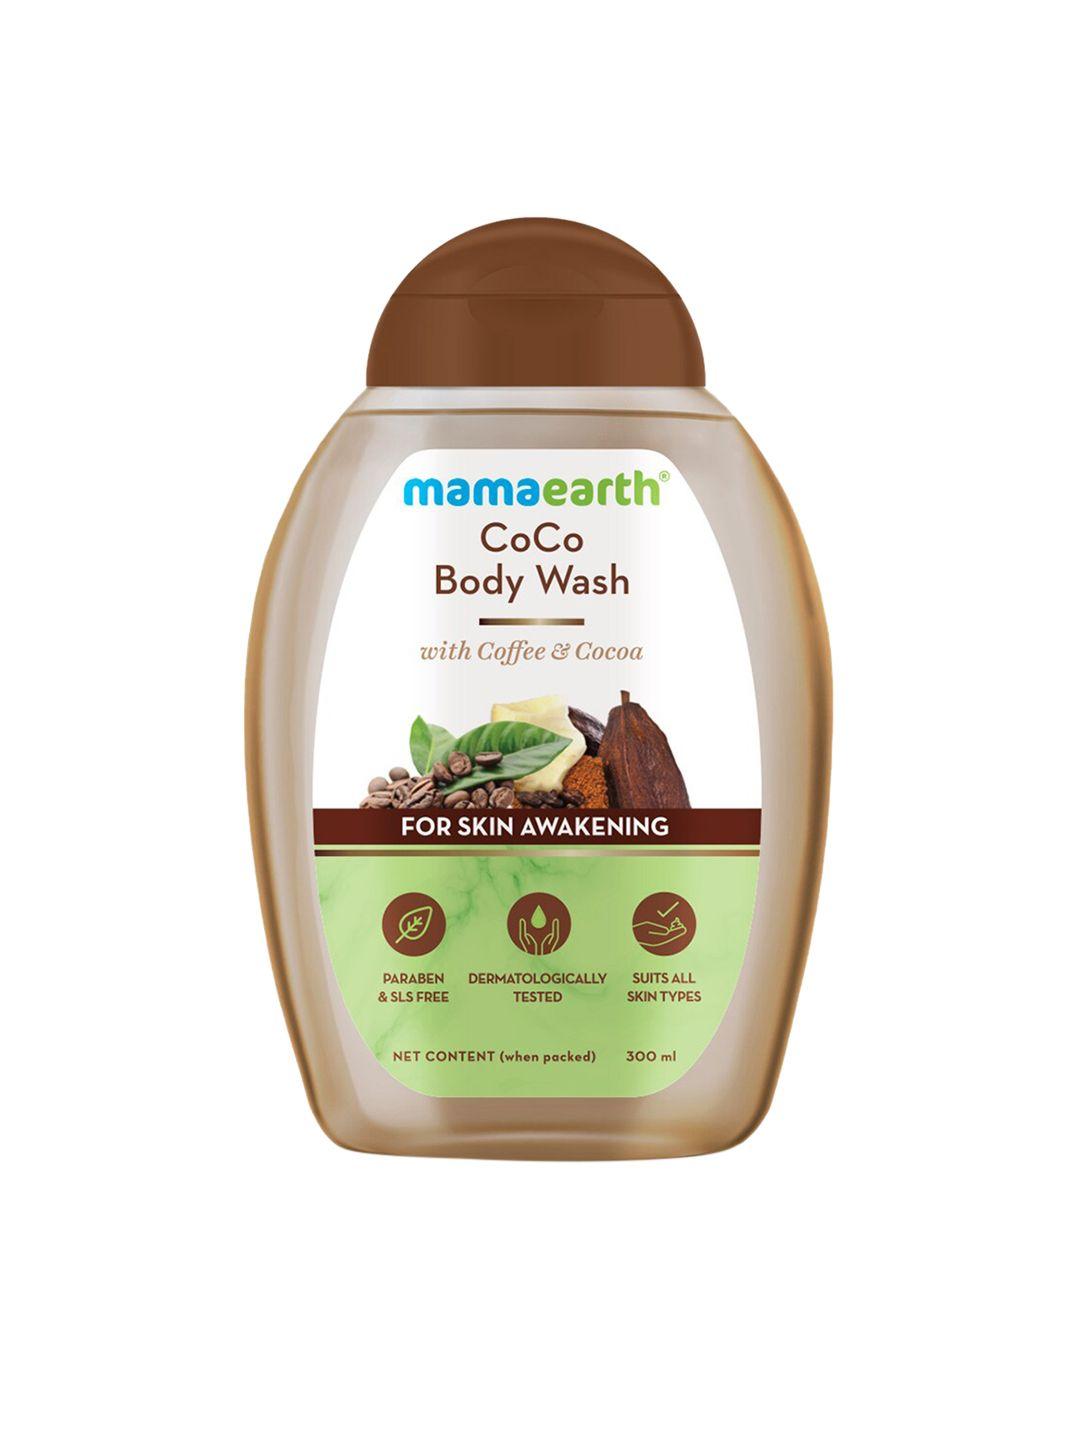 mamaearth unisex coco body wash with coffee & cocoa for skin awakening  300 ml